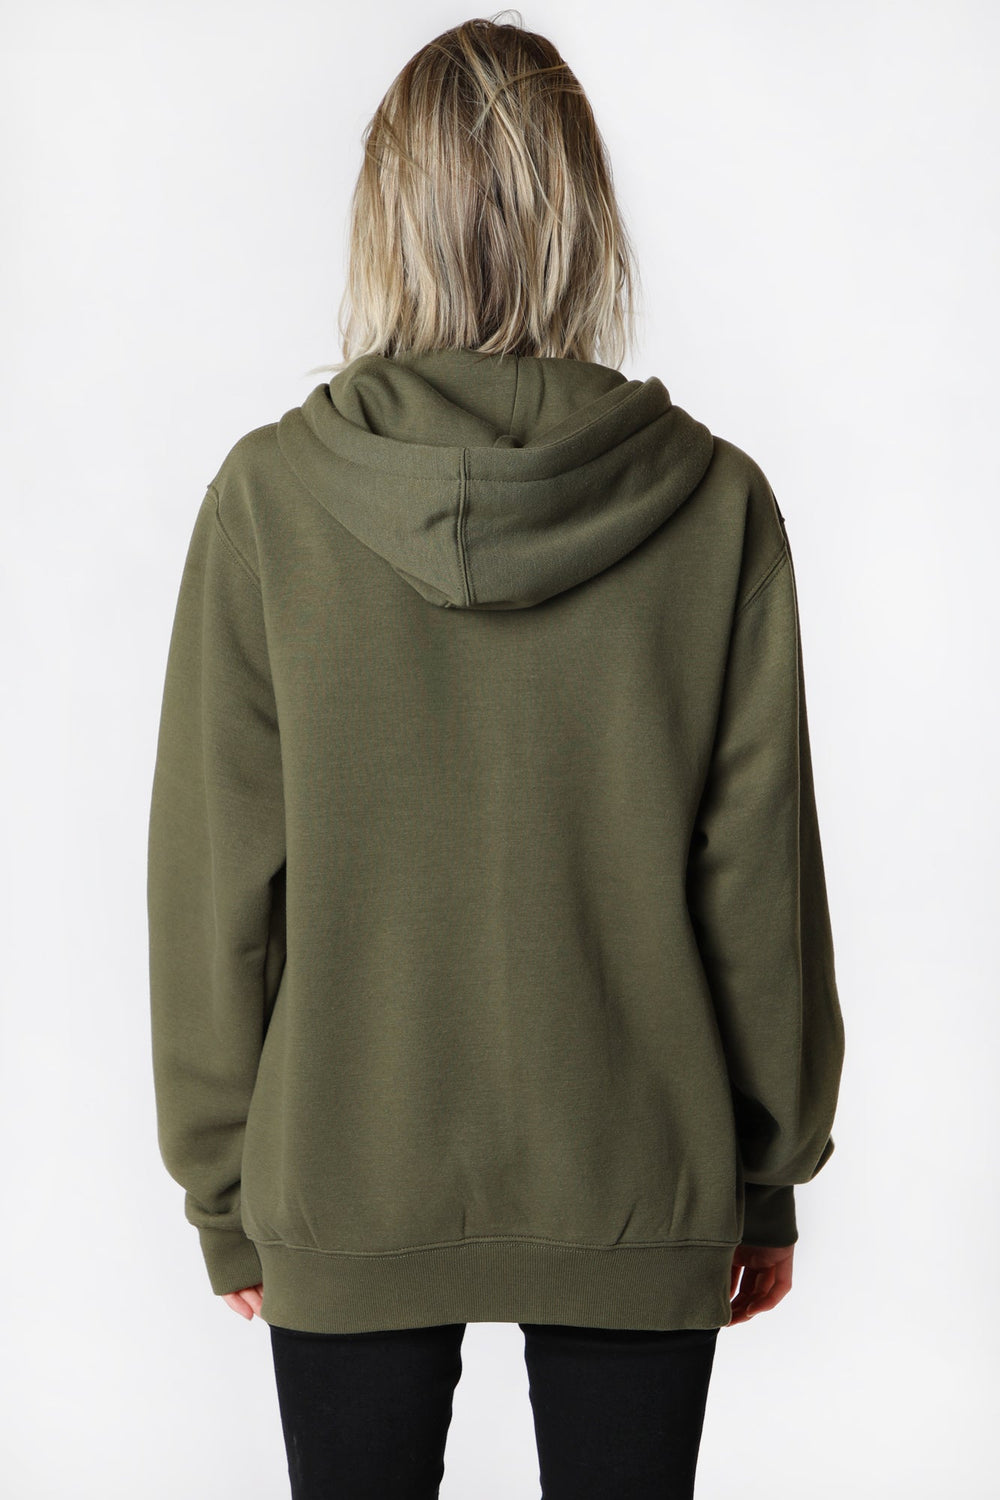 Womens Enygma Graphic Zip-Up Olive Green Hoodie Womens Enygma Graphic Zip-Up Olive Green Hoodie